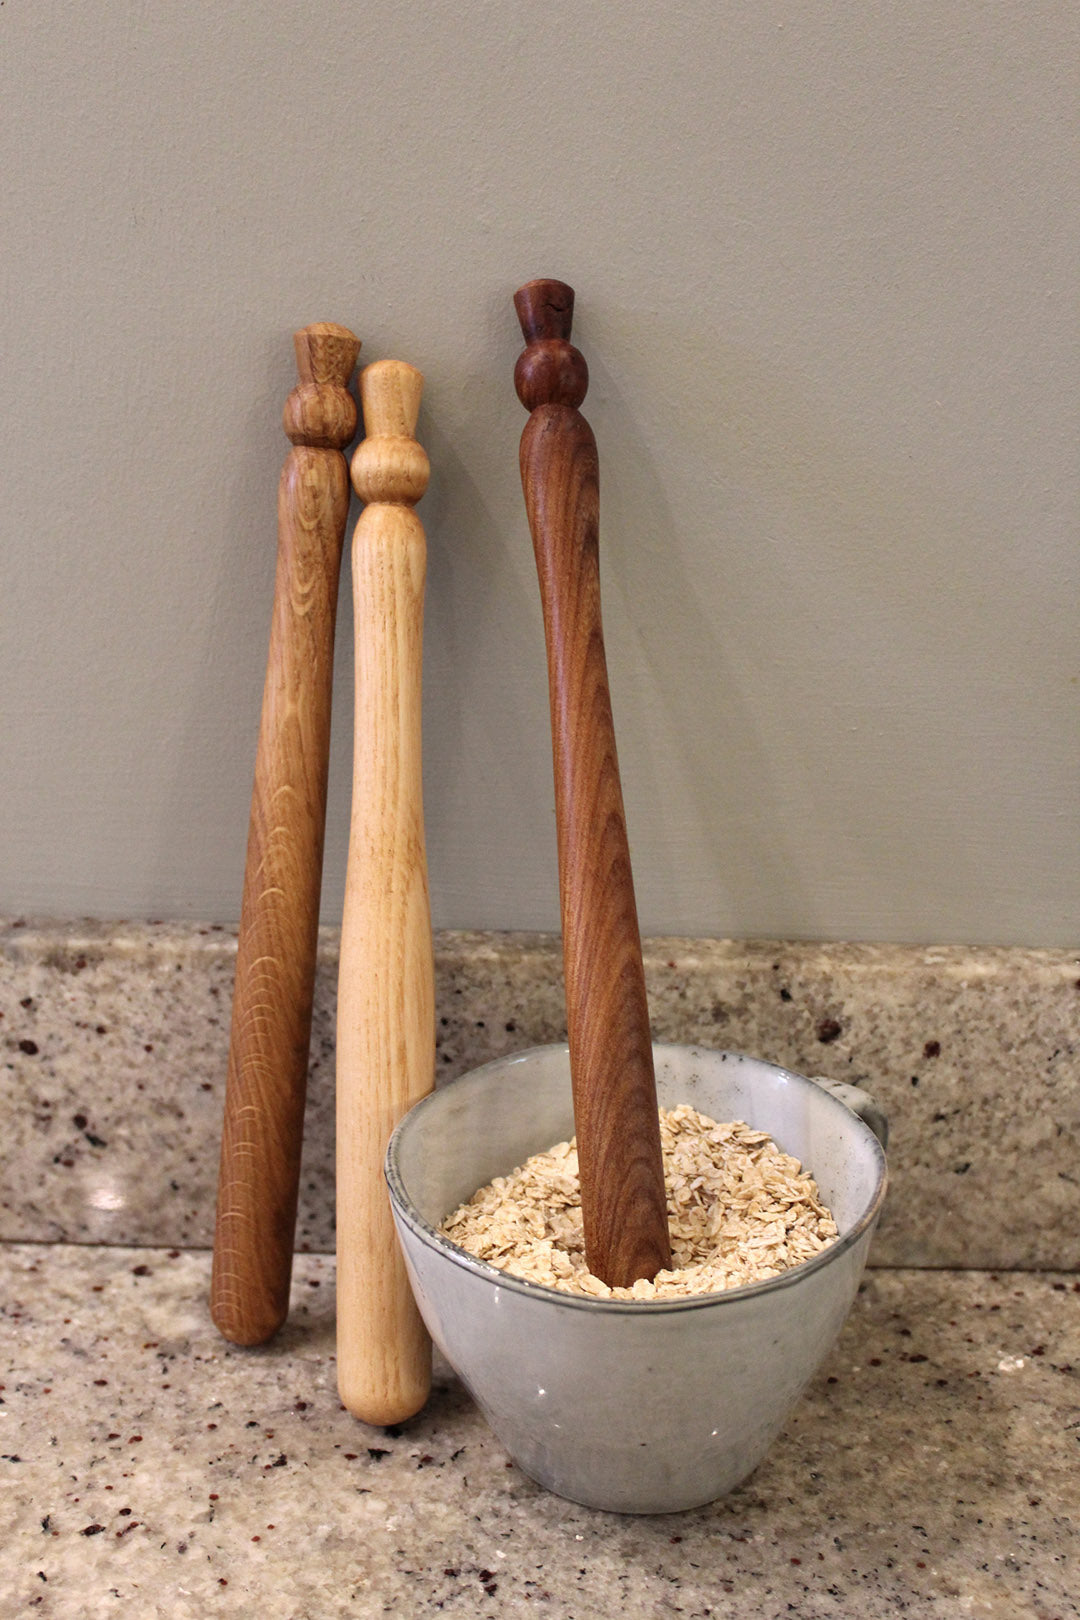 Spurtles in Oak, Elm and Ash pictured with oats. Scottish Textiles Showcase.